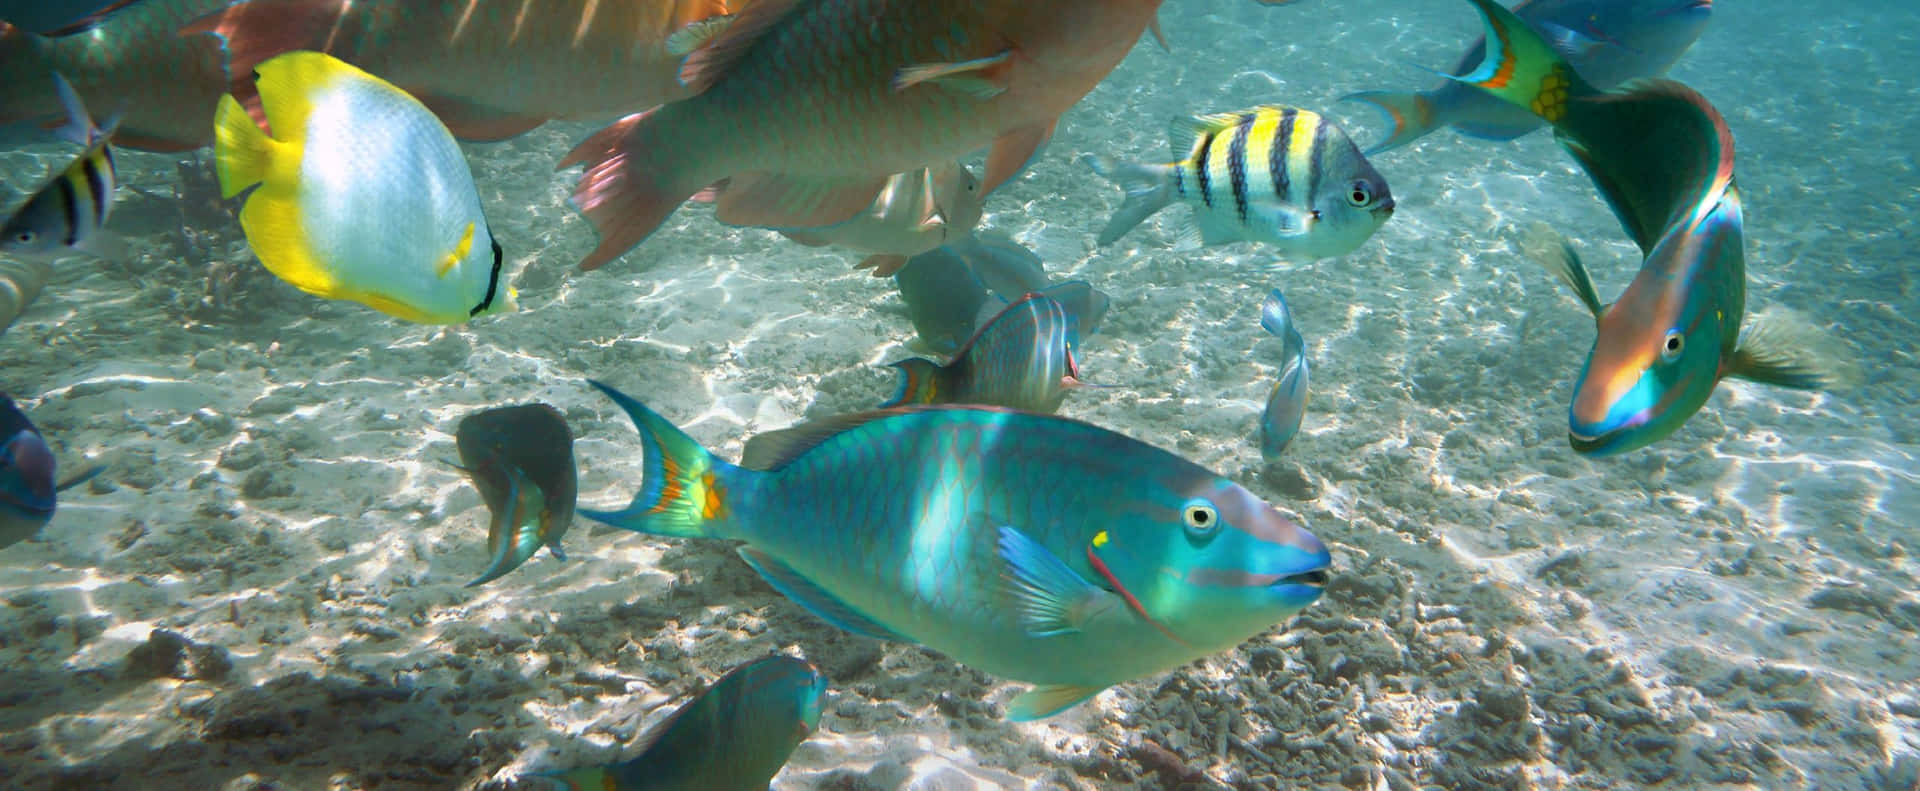 Vibrant Colored Parrotfish Swimming In The Coral Reef. Wallpaper